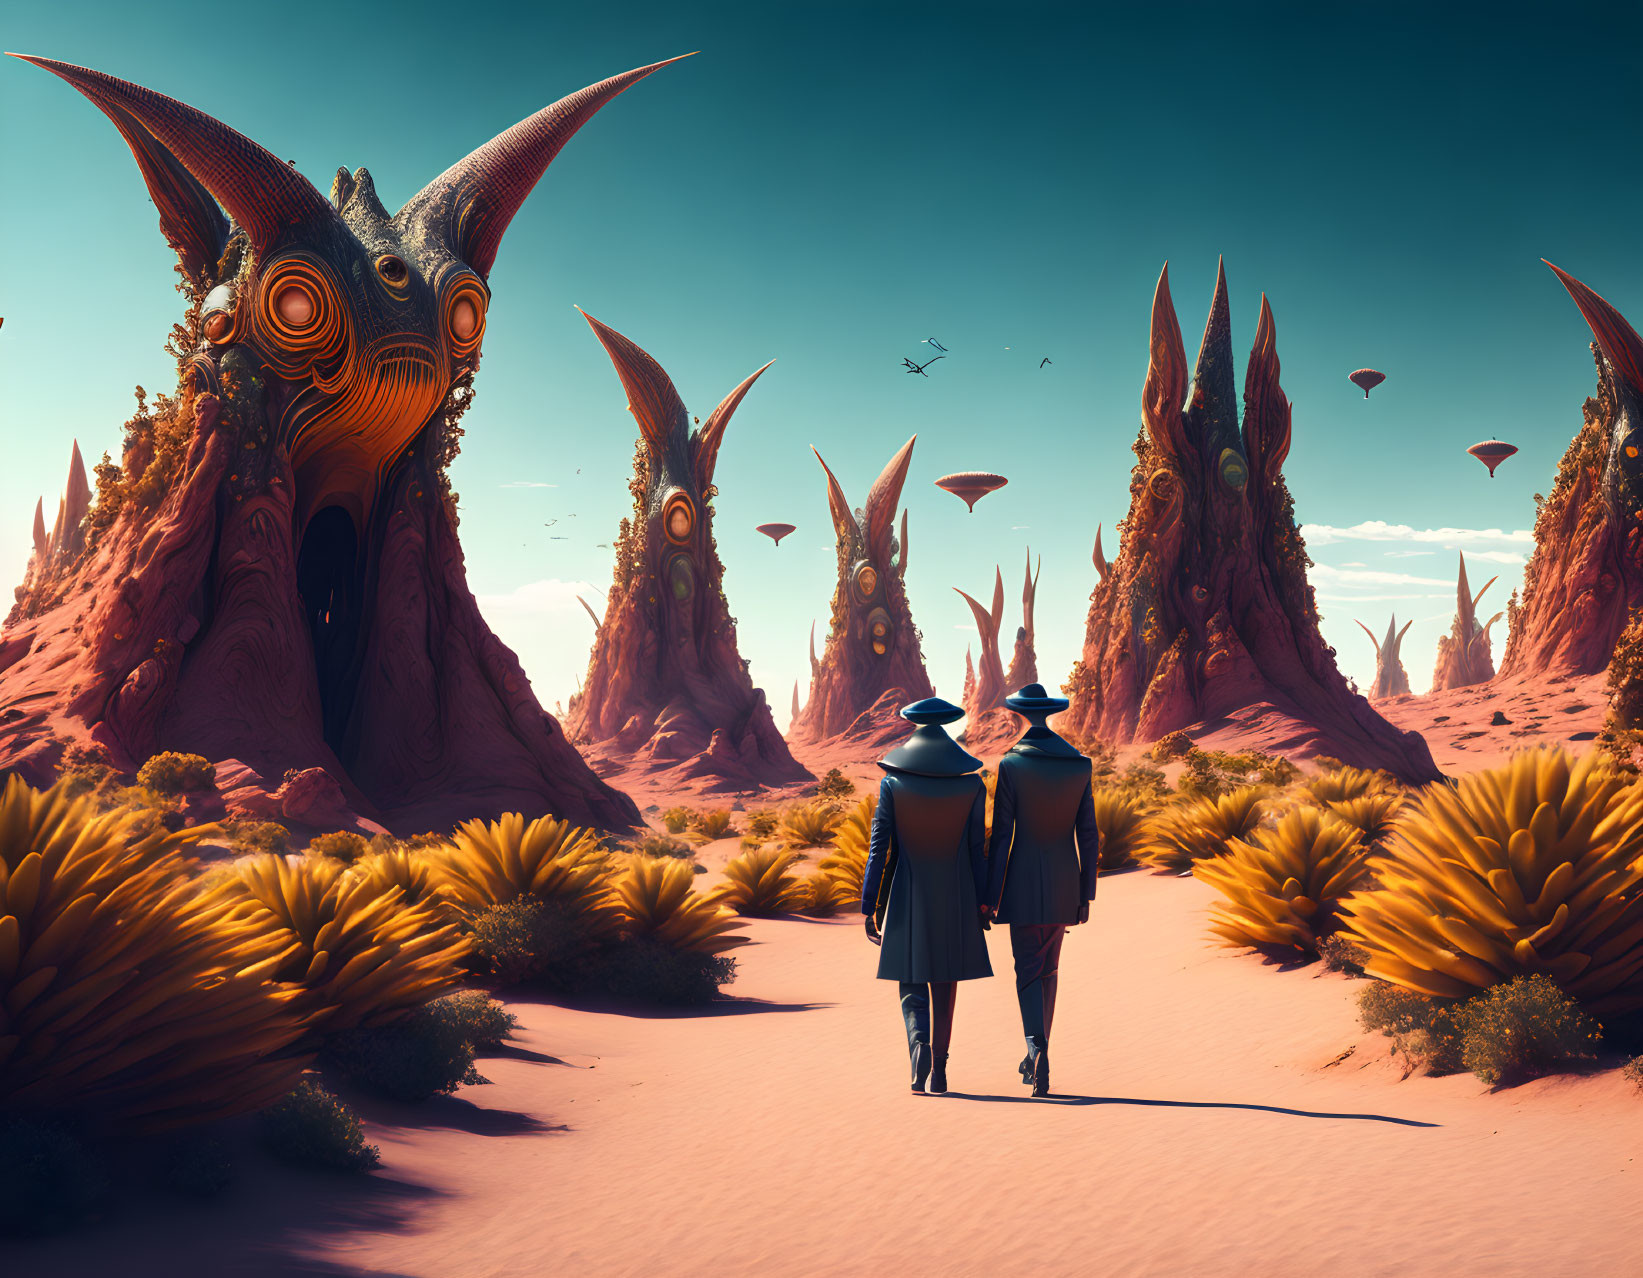 Figures in hats and coats near alien structures under surreal sky